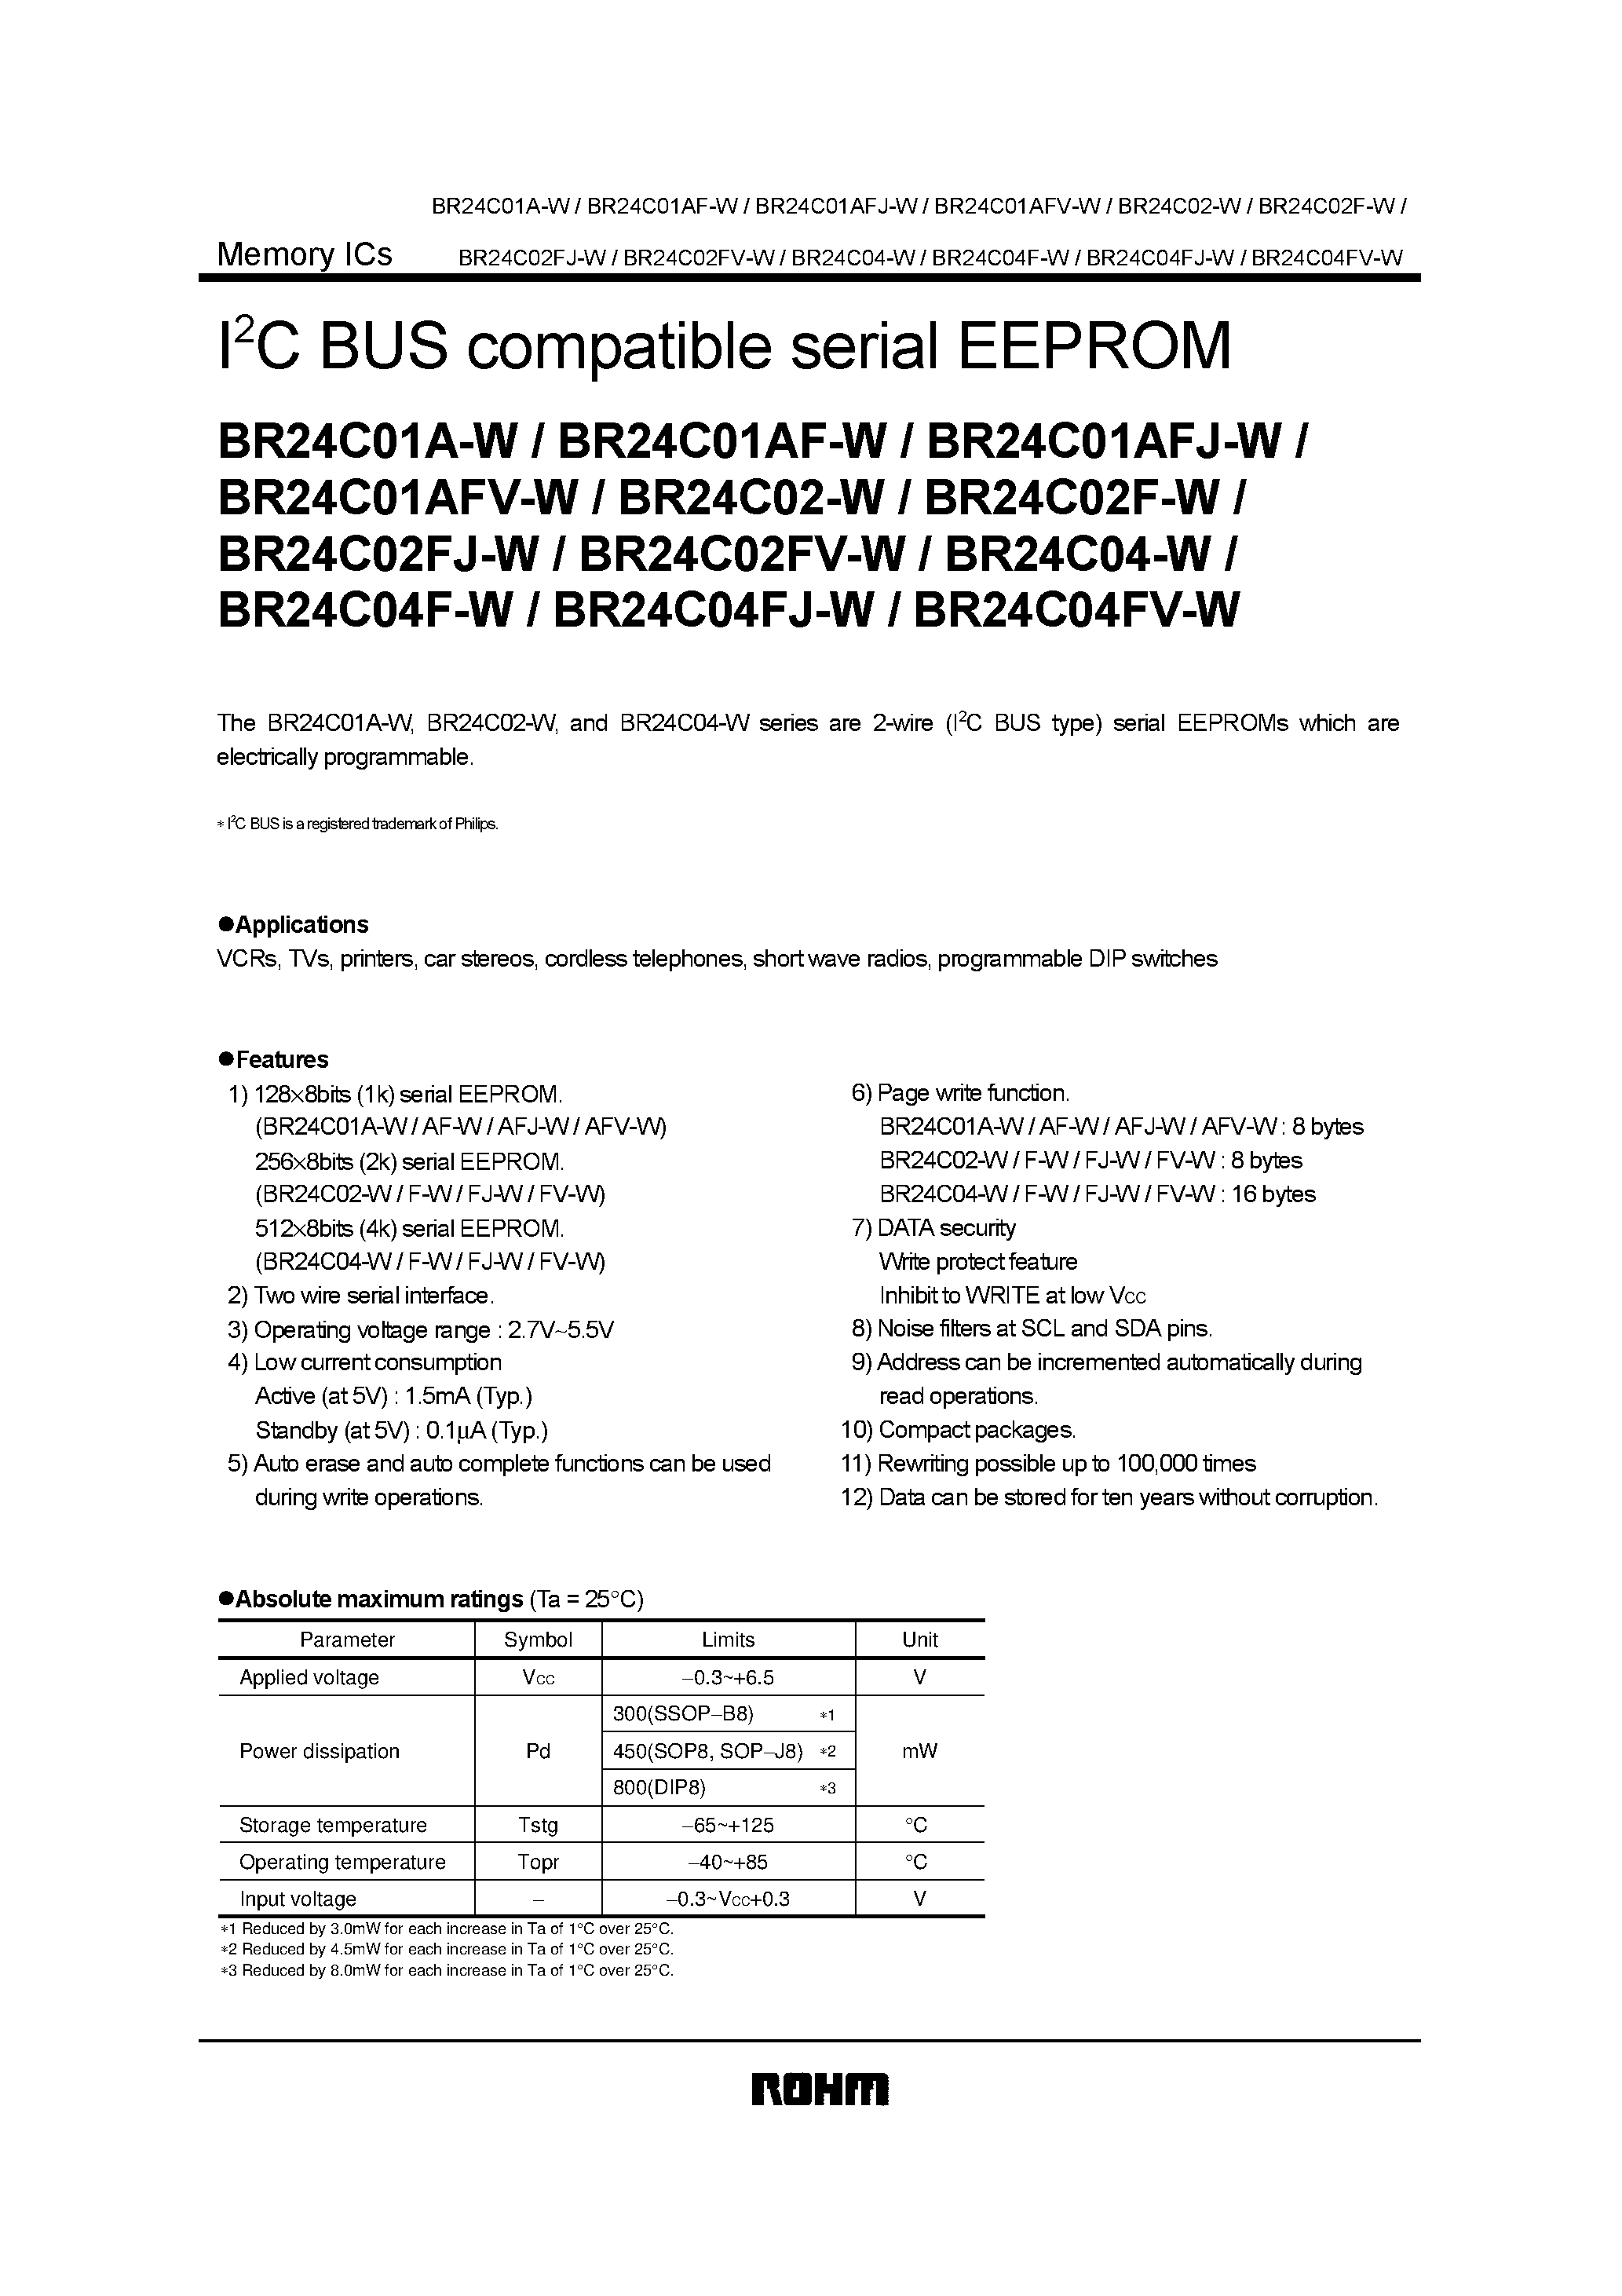 Datasheet BR24C04F-W - I2C BUS compatible serial EEPROM page 1